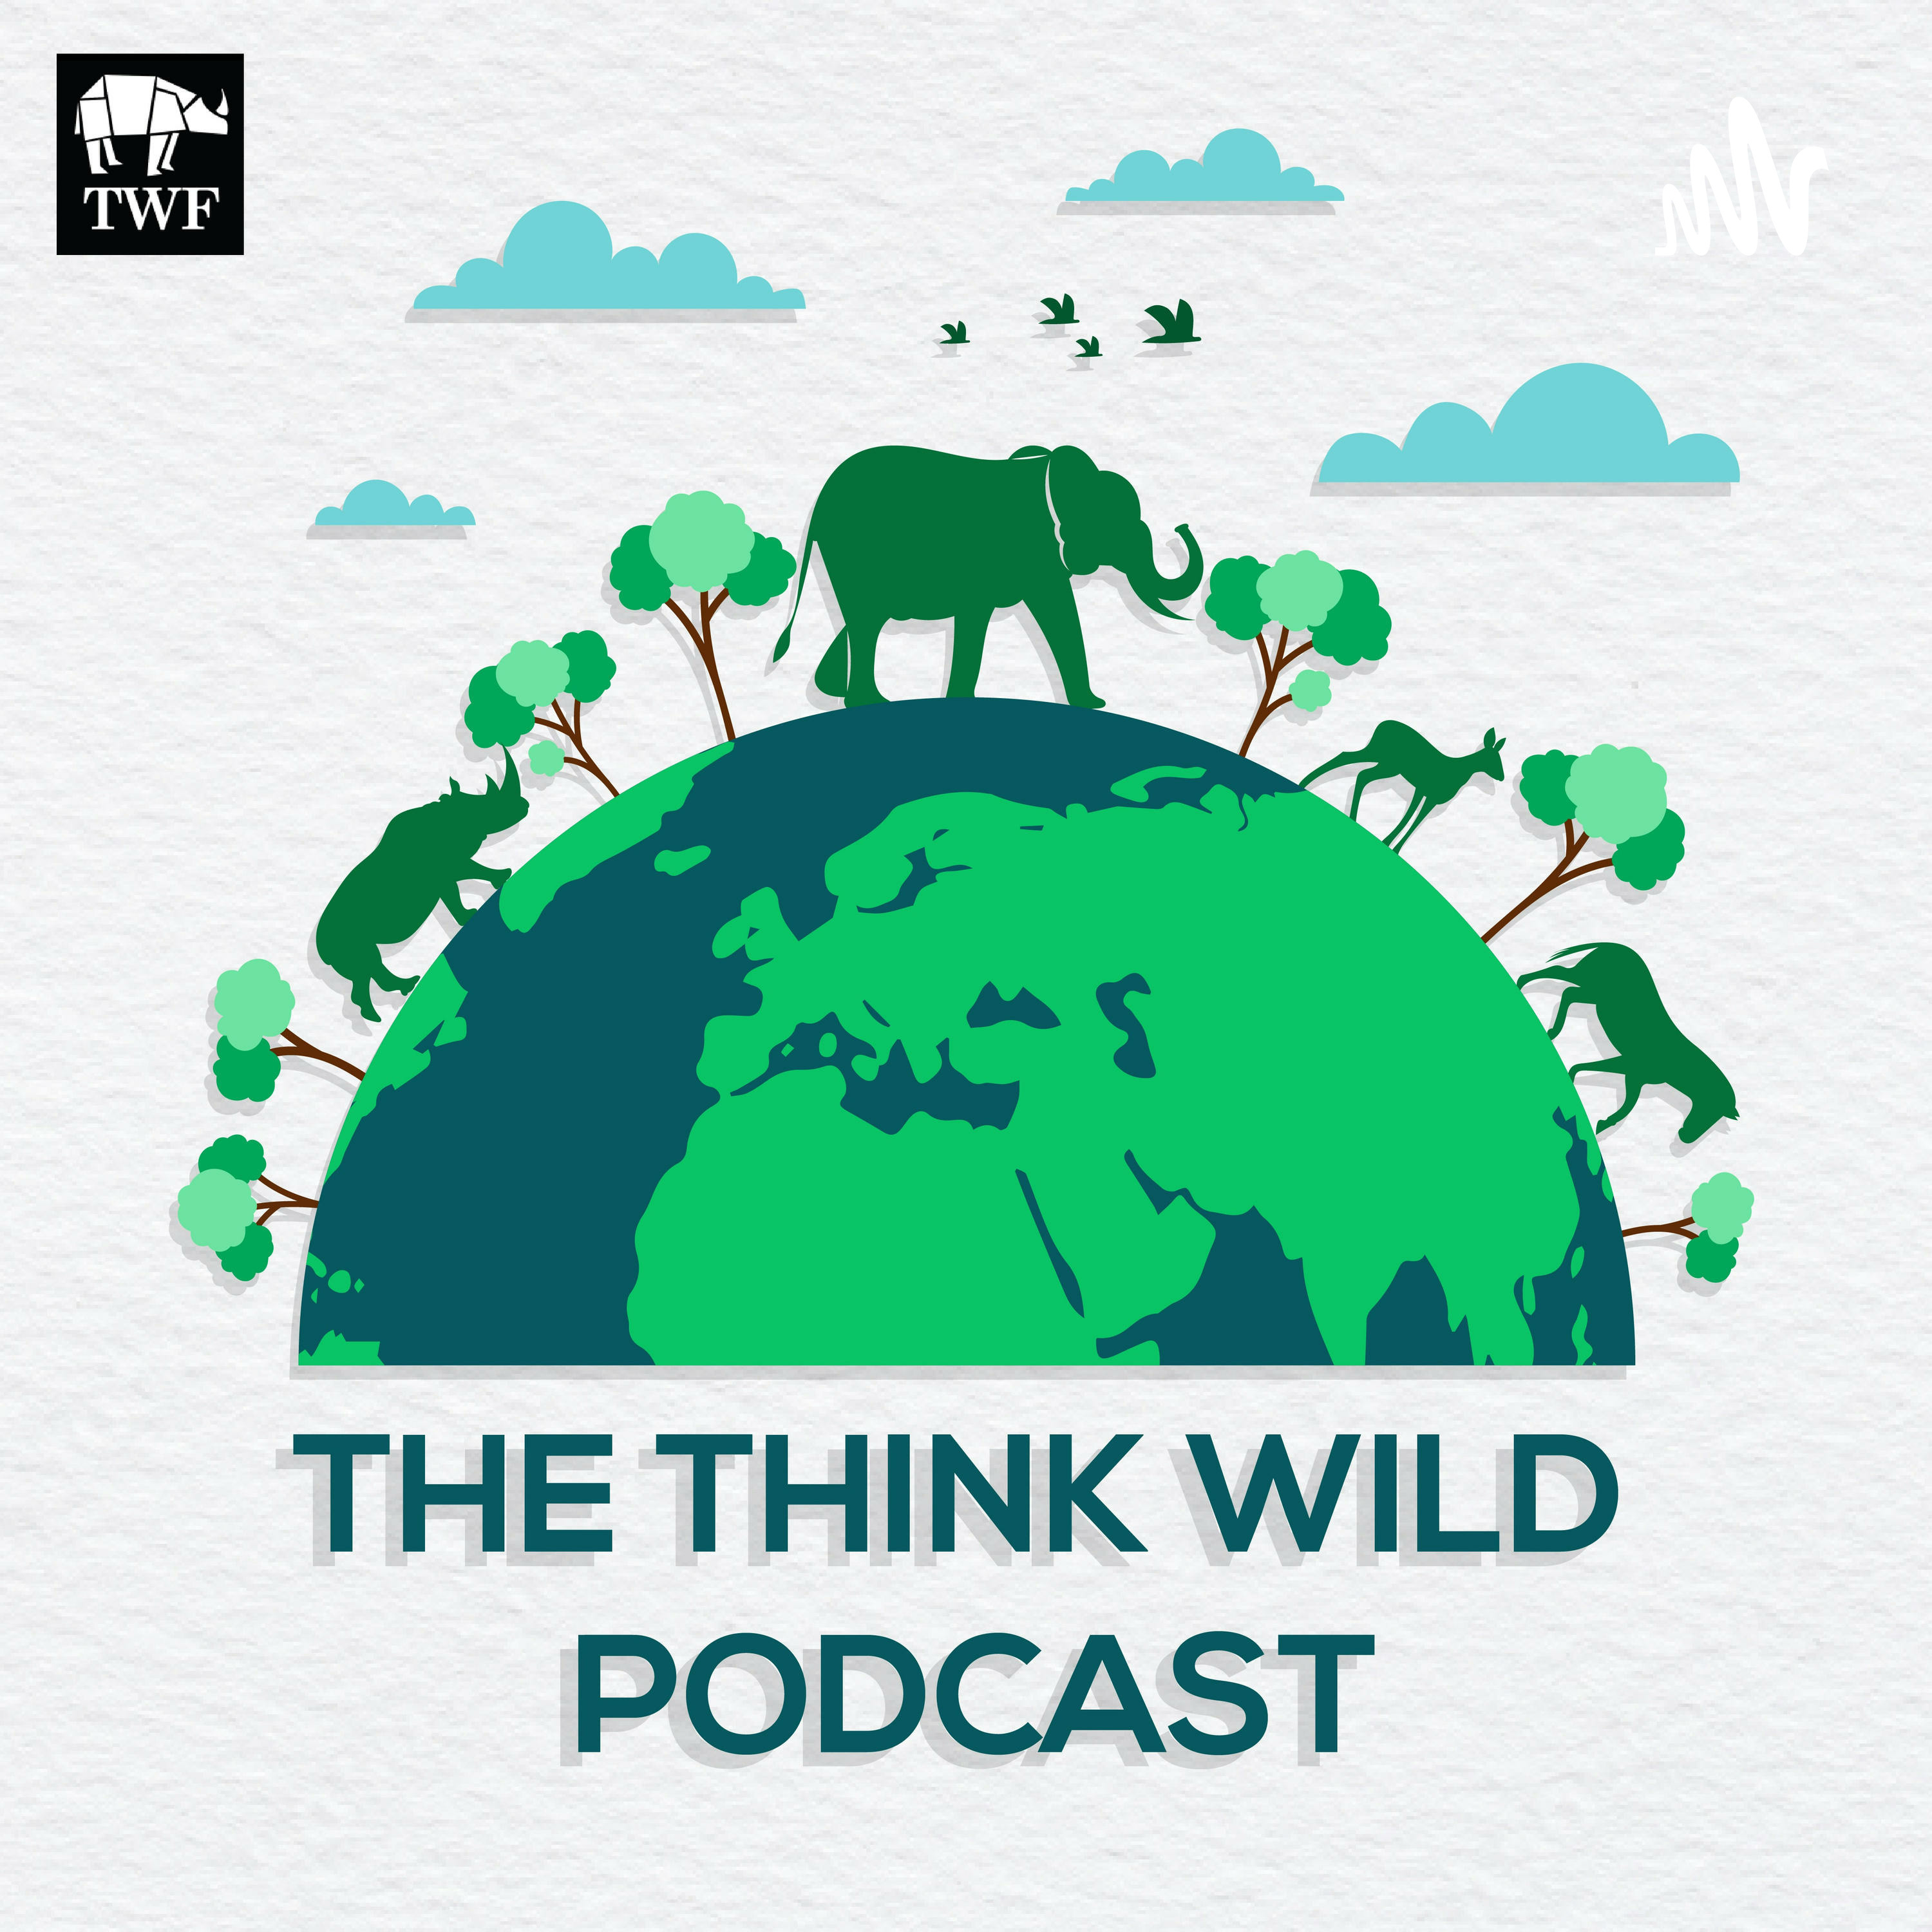 Episode 49: Conserving Gujarat’s Sloth Bears with Nishith Dharaiya, Founder of WCB Research Foundation